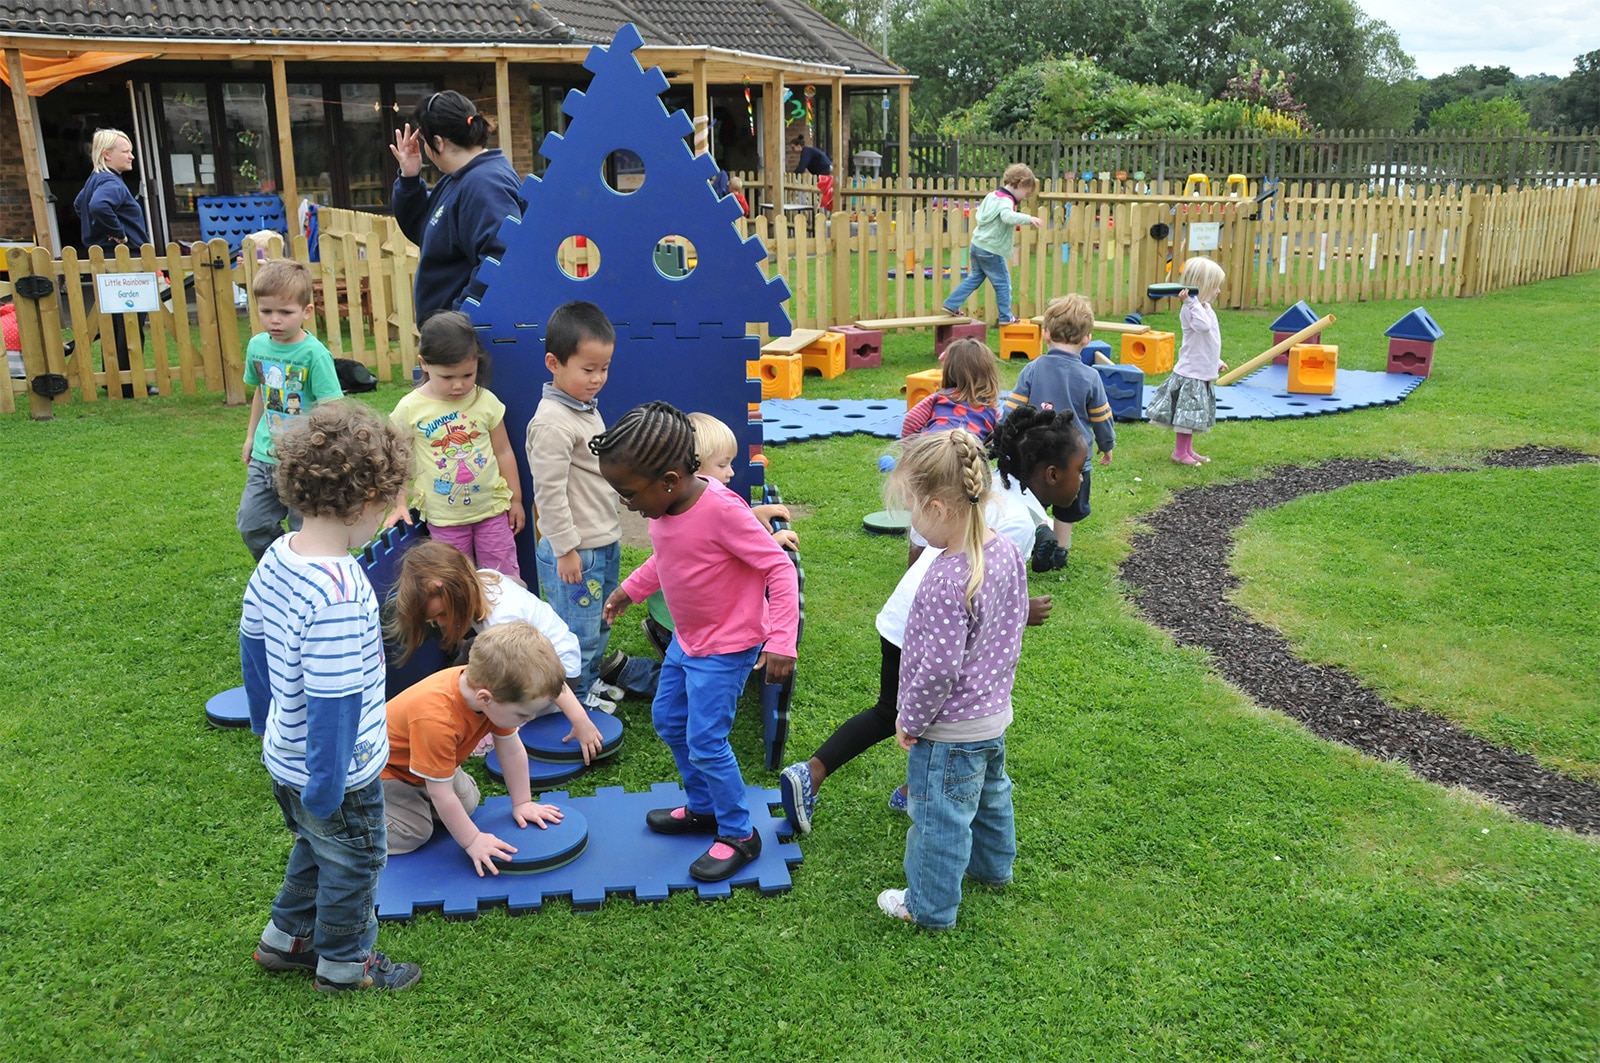 Children playing with Poddely set outdoors